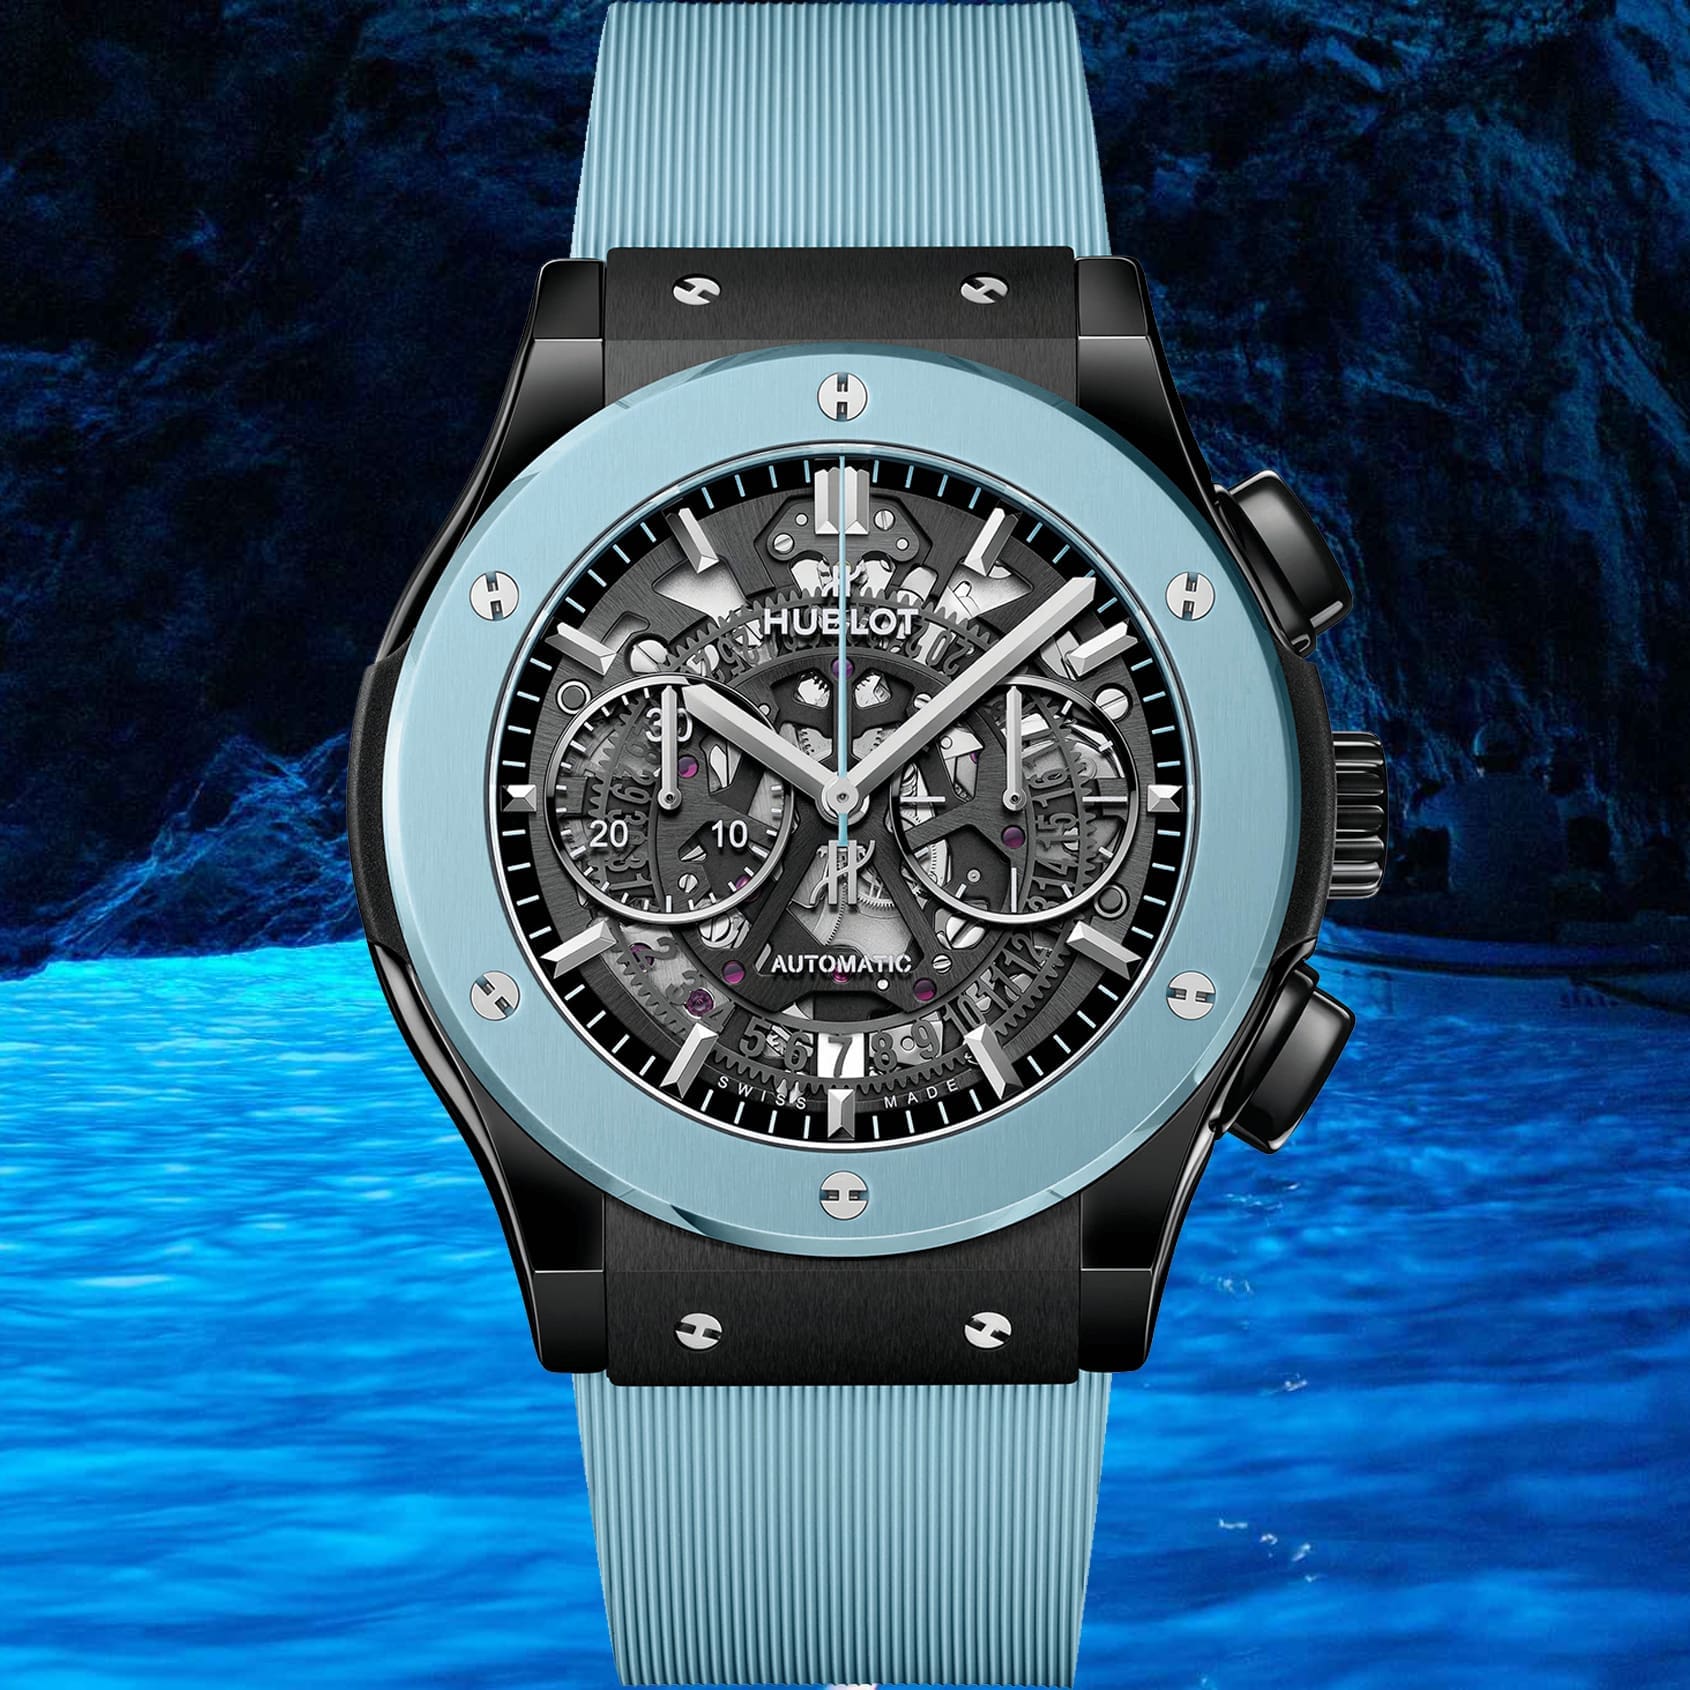 Ibiza! Capri! St Tropez!  The Hublot Loves Summer Collection captures the feel-good holiday spirit